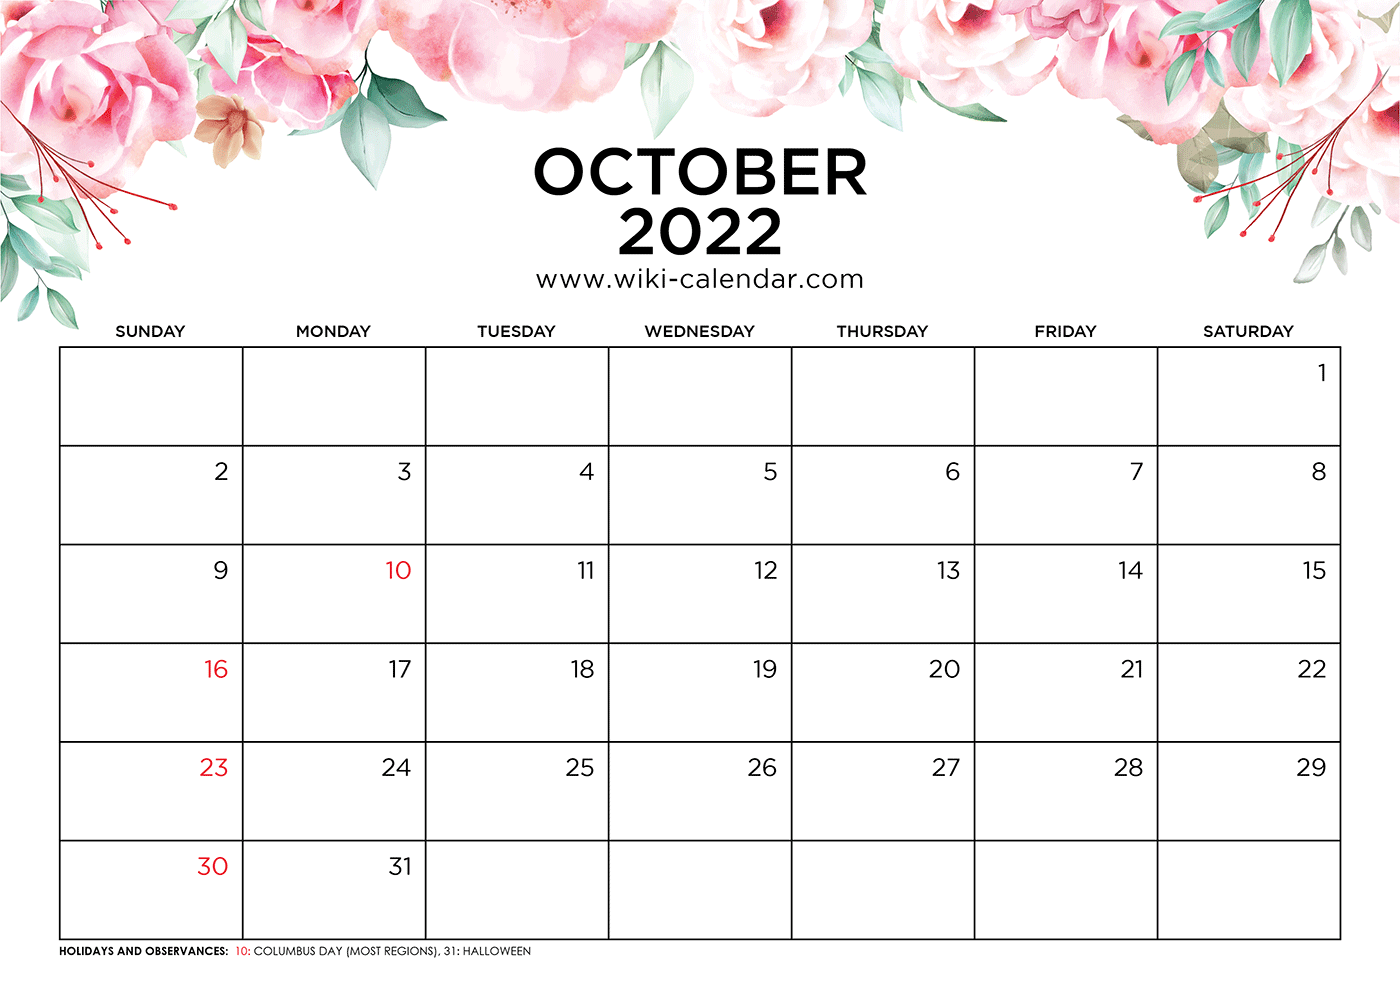 Free Printable Monthly Calendar October 2022 Free Printable October 2022 Calendars - Wiki Calendar